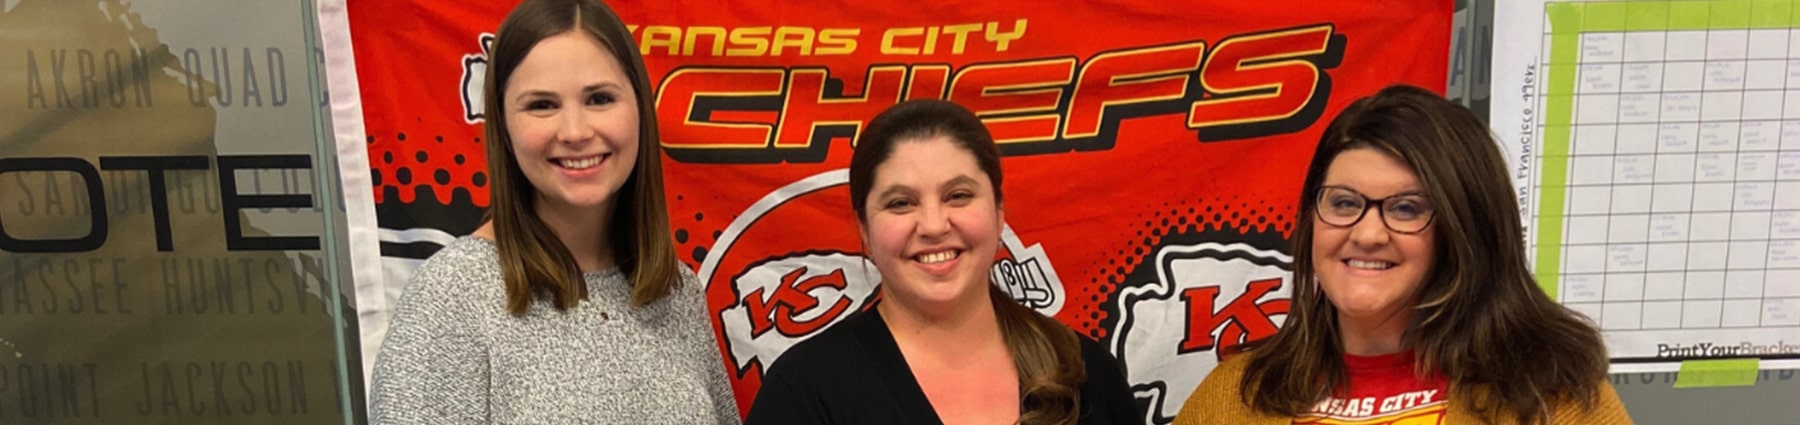 Three women smiling in front of Kansas City Chiefs poster